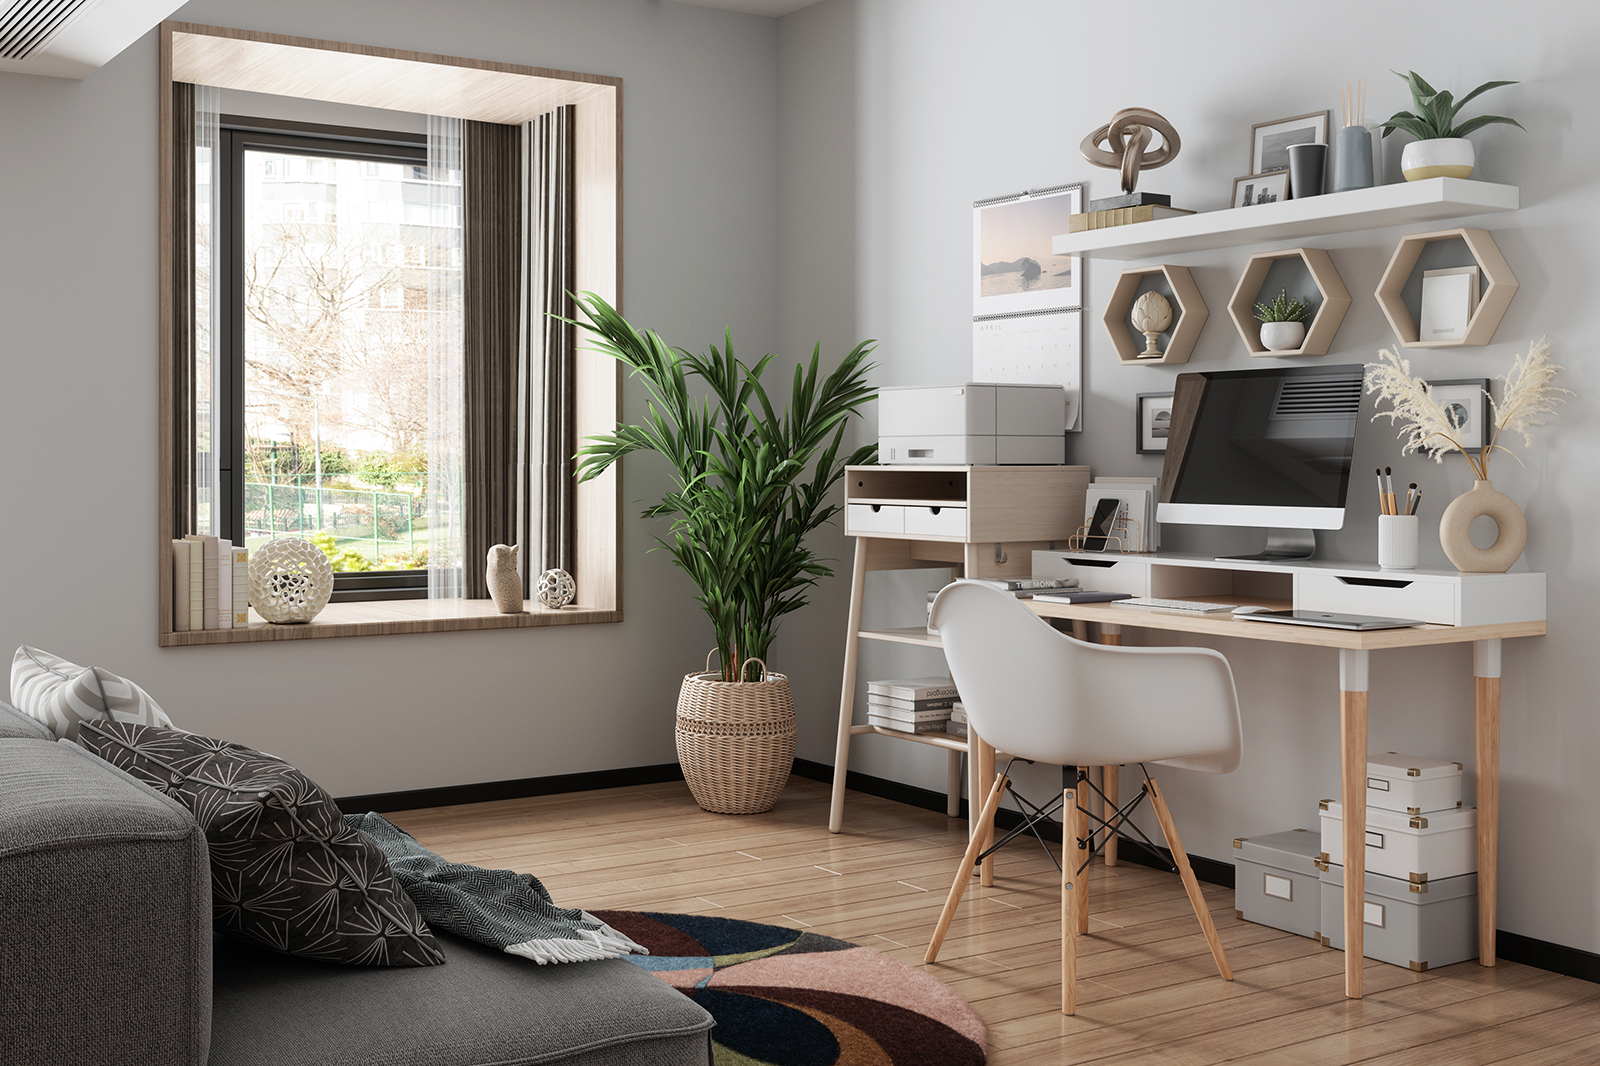 From Comfort to Productivity: Designing Your Ideal Home Office Setup